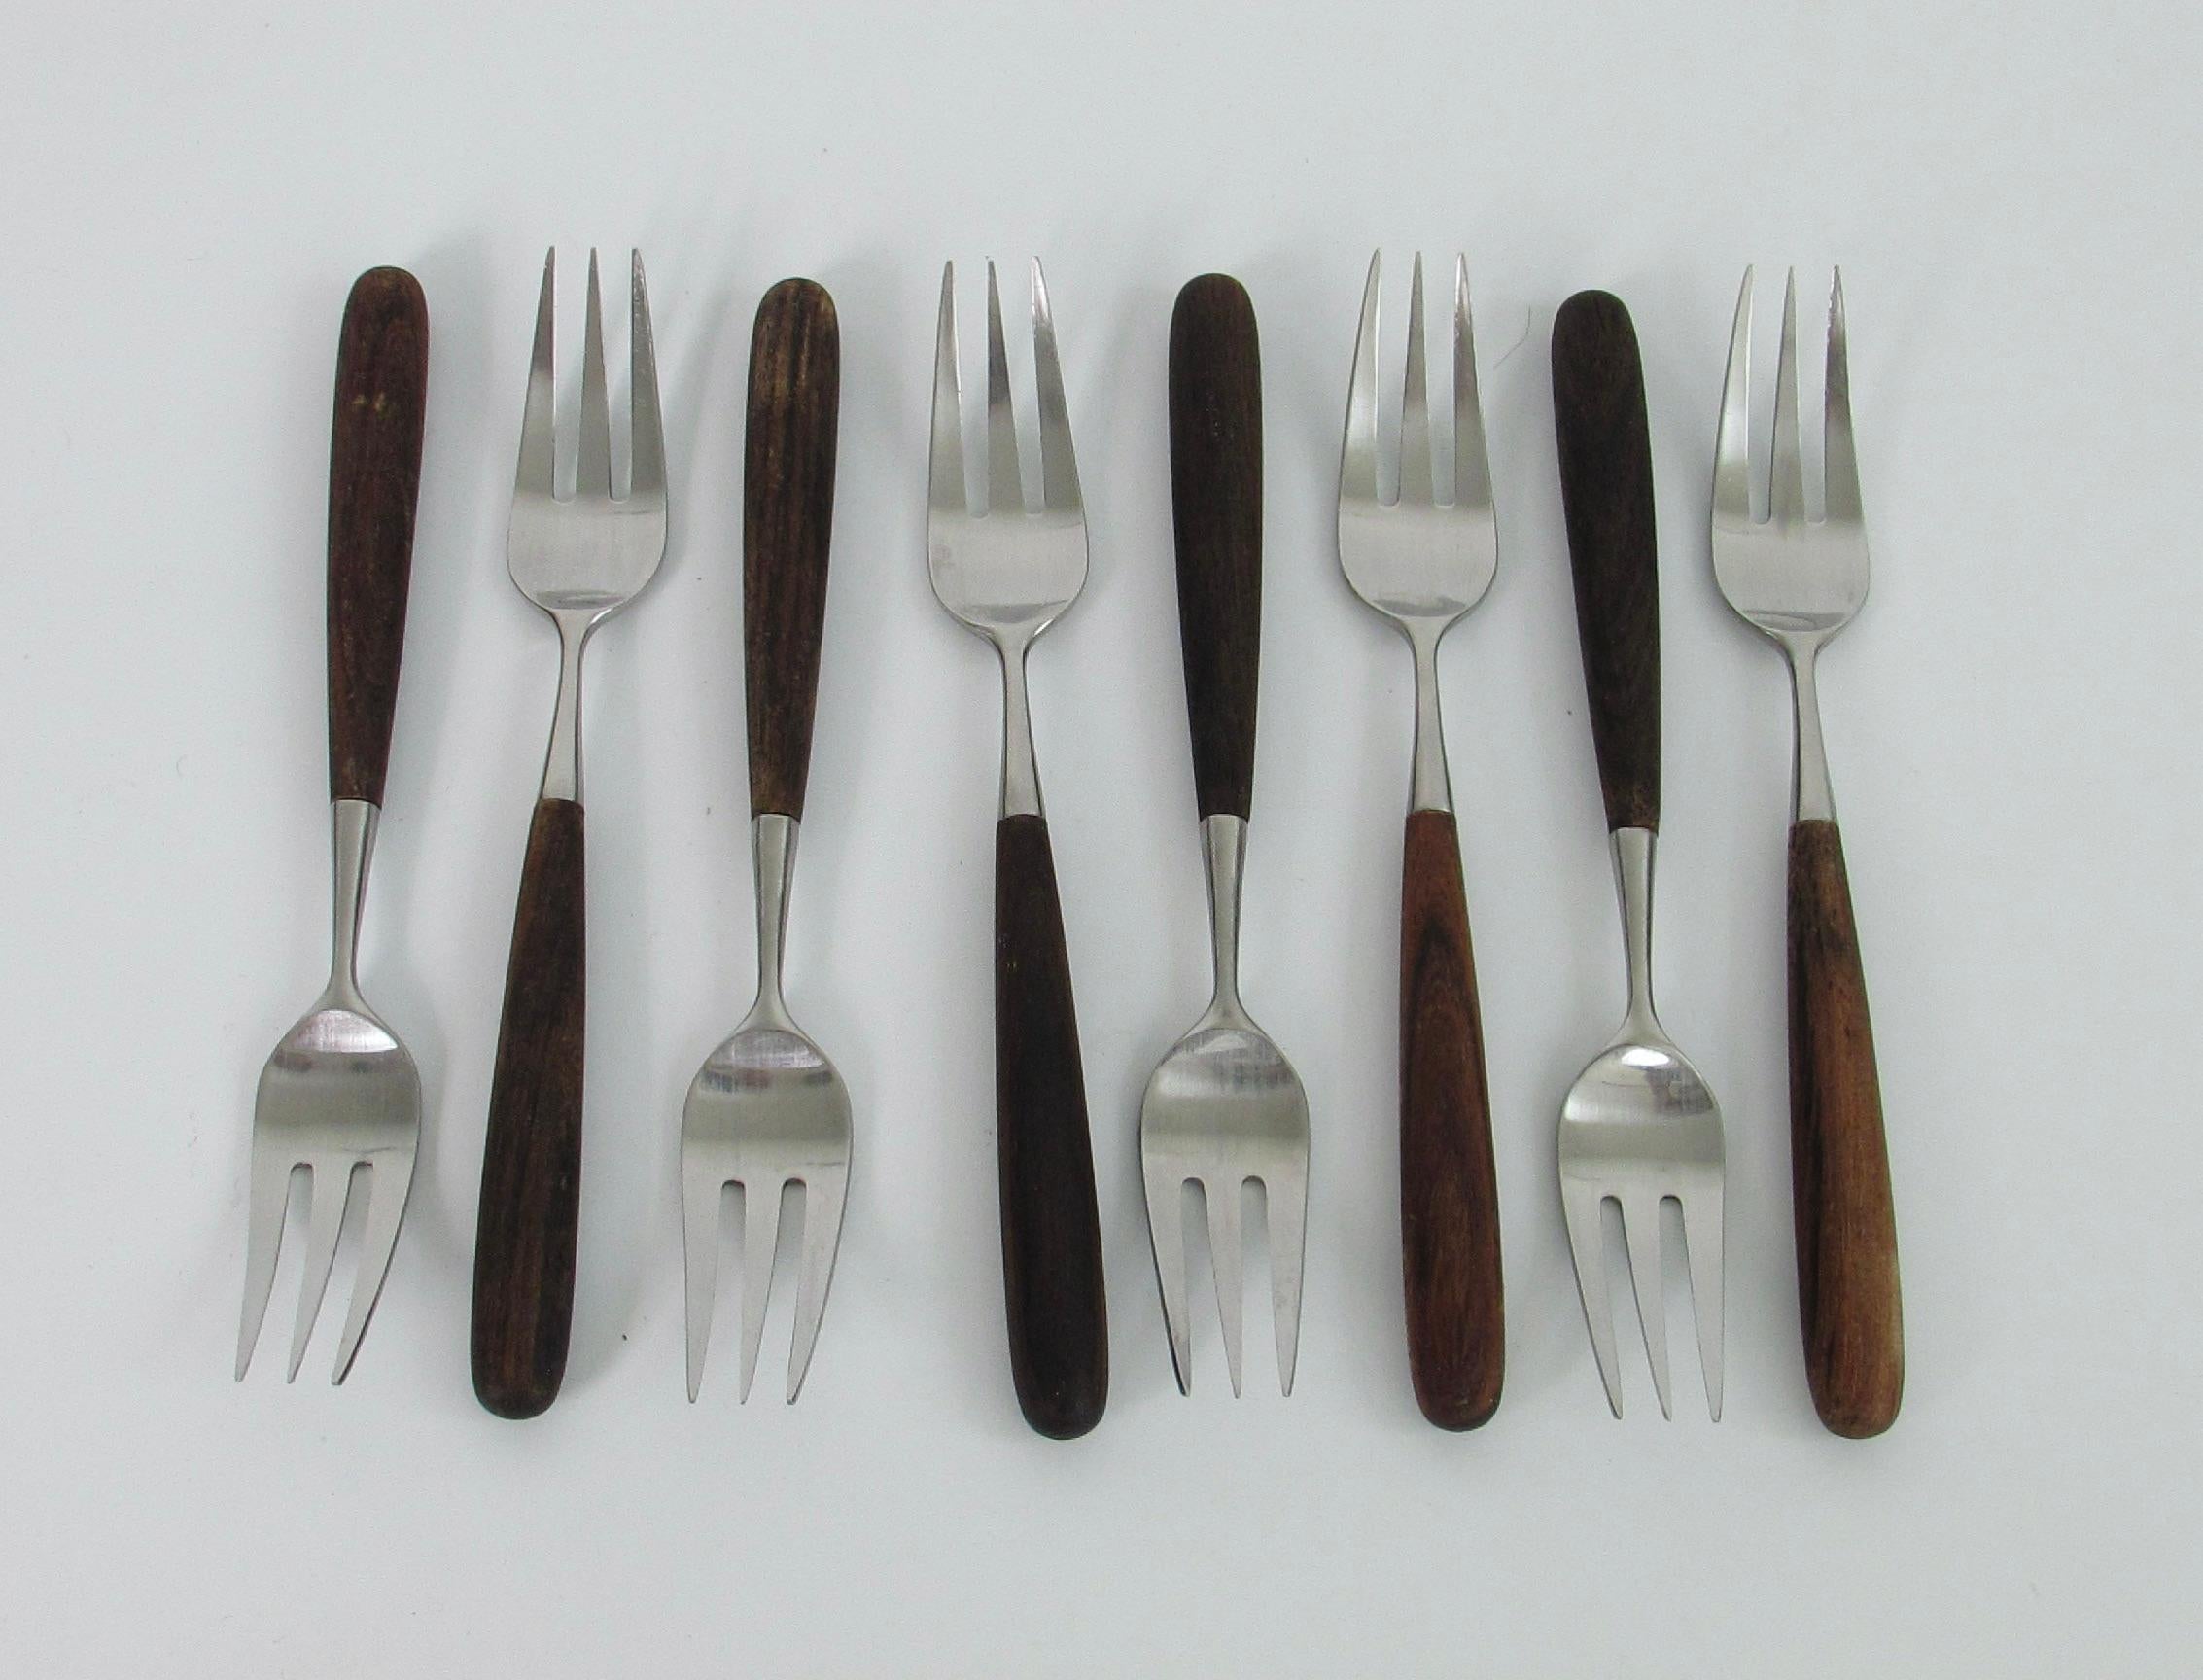 45 Piece Laufer Rosewood Handle Stainless Steel Flatware Service for Eight For Sale 10